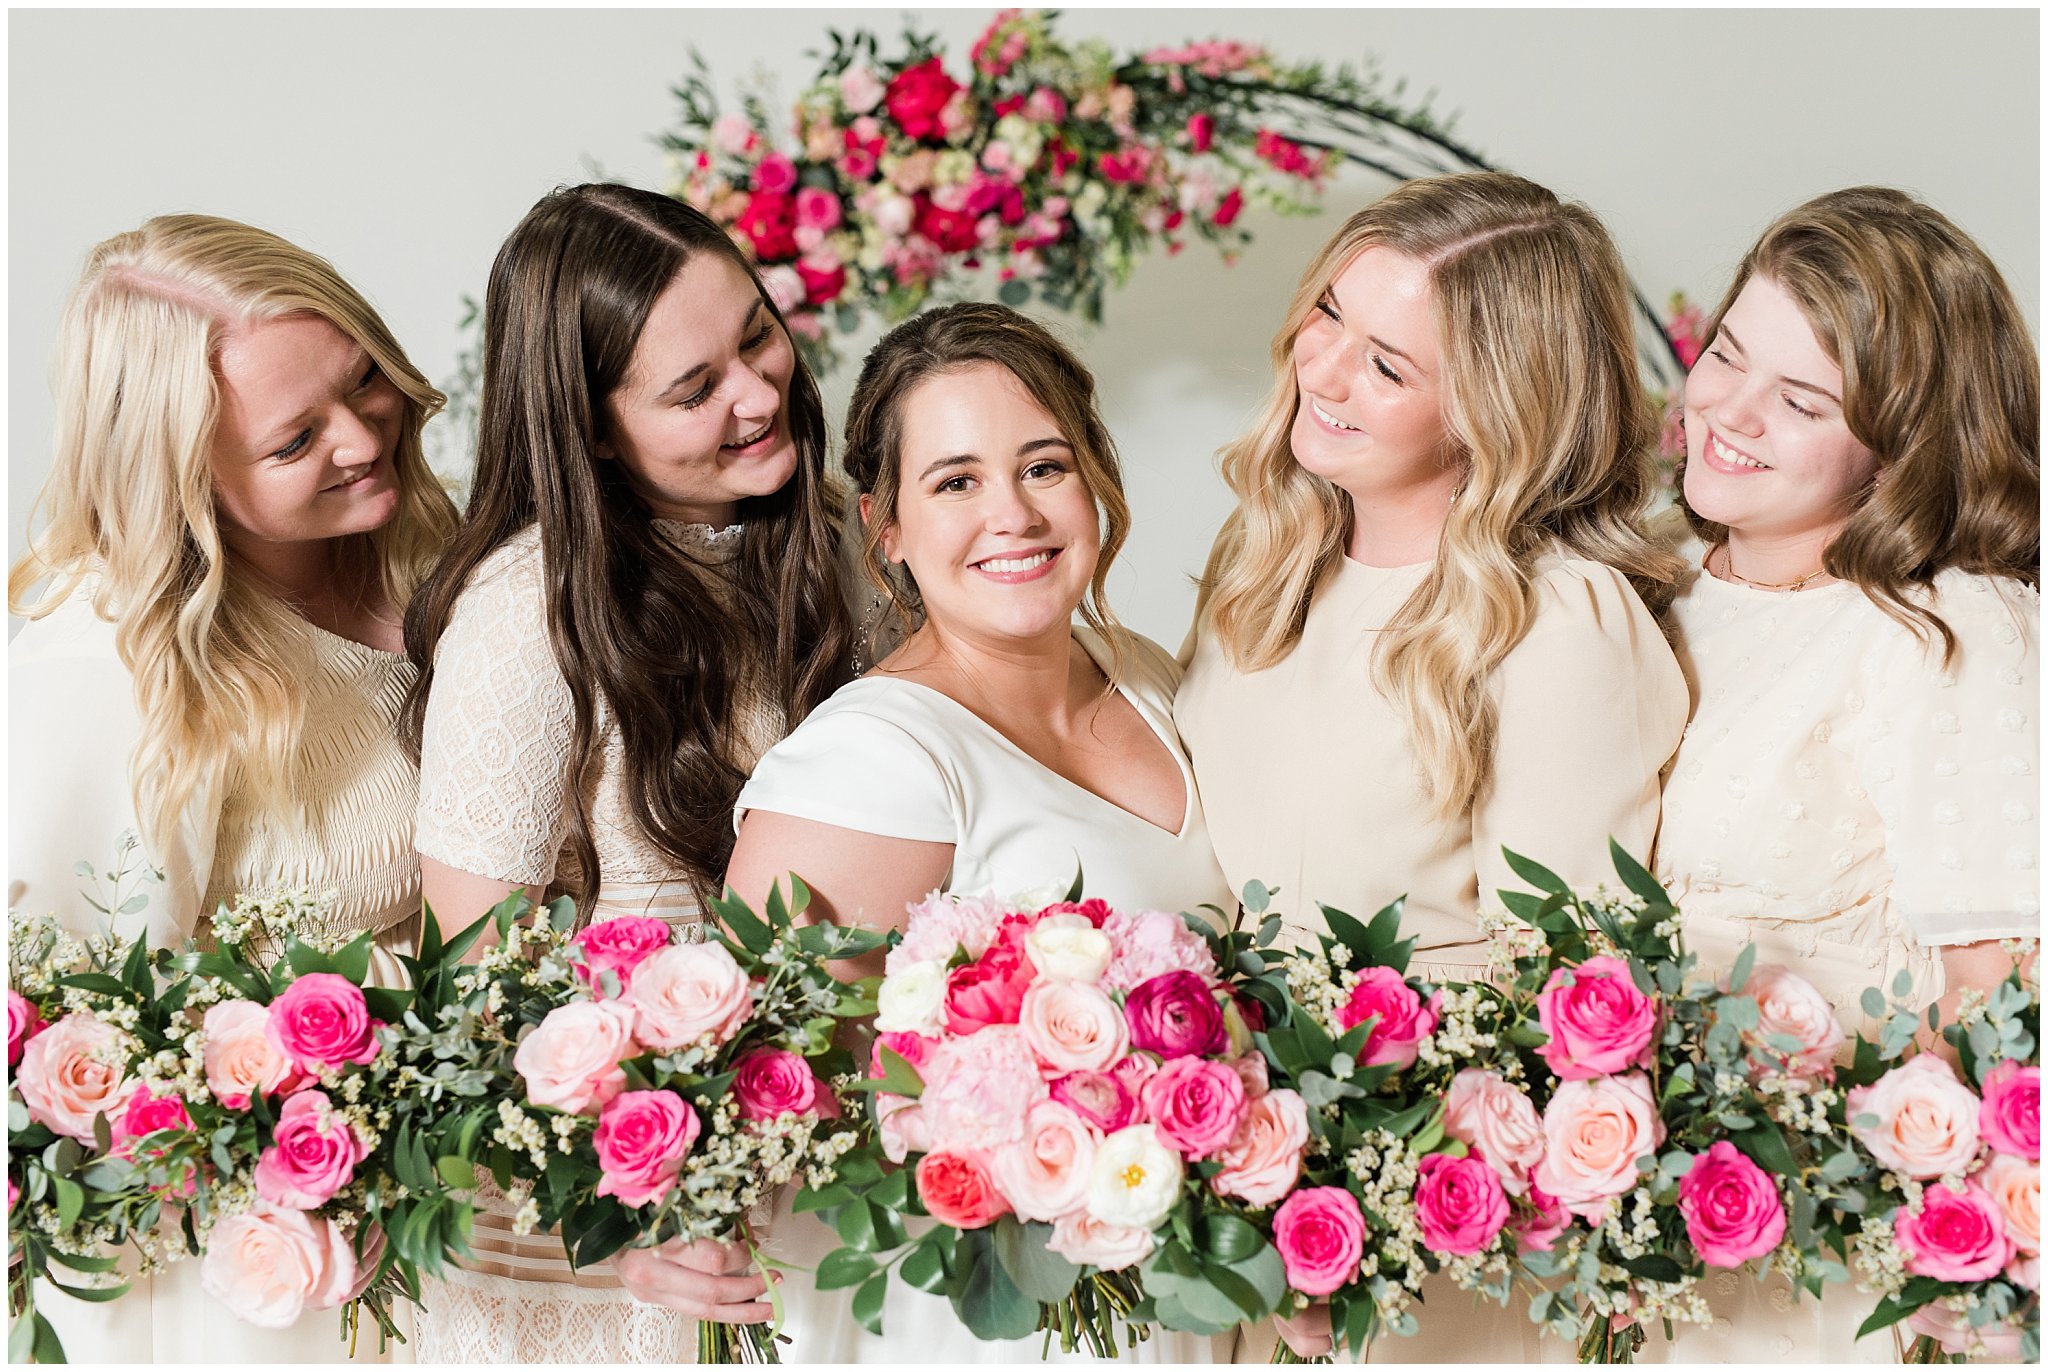 Bride and bridesmaids wearing cream colored dresses in front of floral arch in shades of pink | Talia Event Center Summer Wedding | Jessie and Dallin Photography